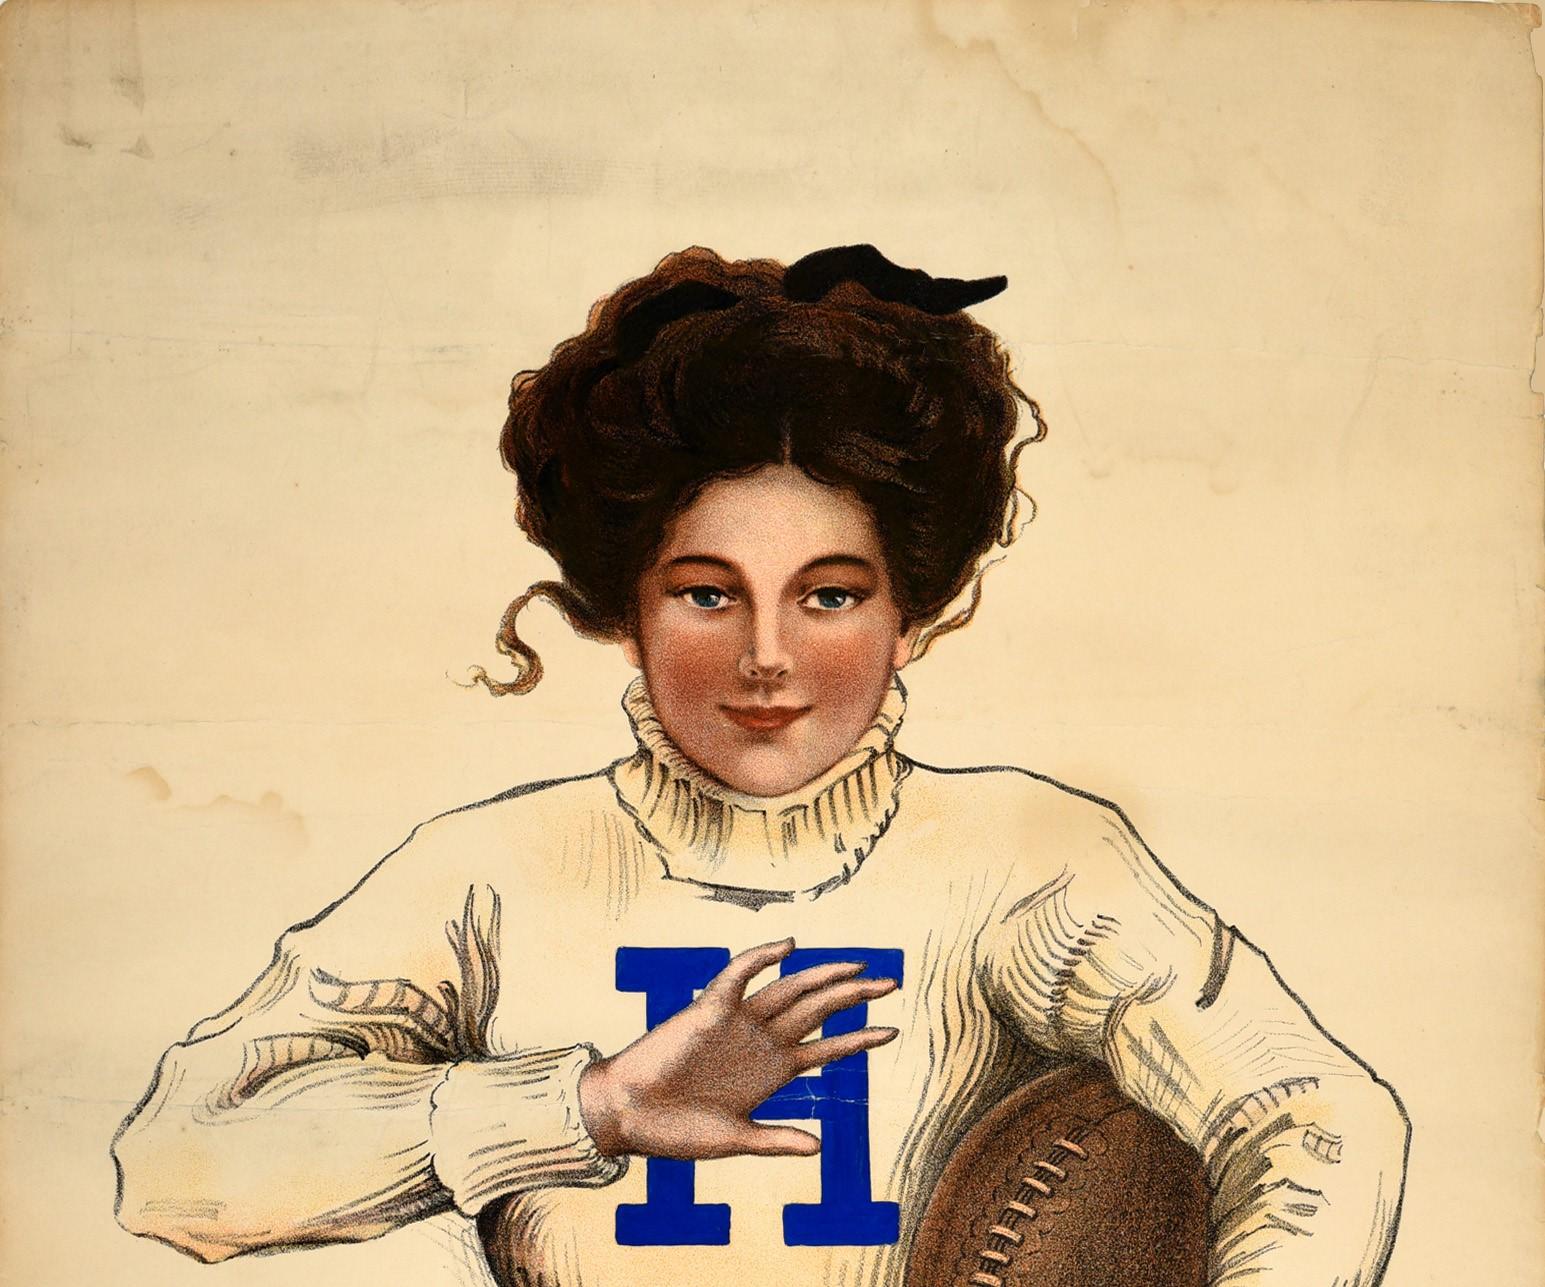 Original antique college sport poster for Hazleton High School featuring an illustration of young lady holding an American football with a bold letter H on her top, the school logo on the side below. Artwork by Marguerite Beaman Neale (1886-1964).